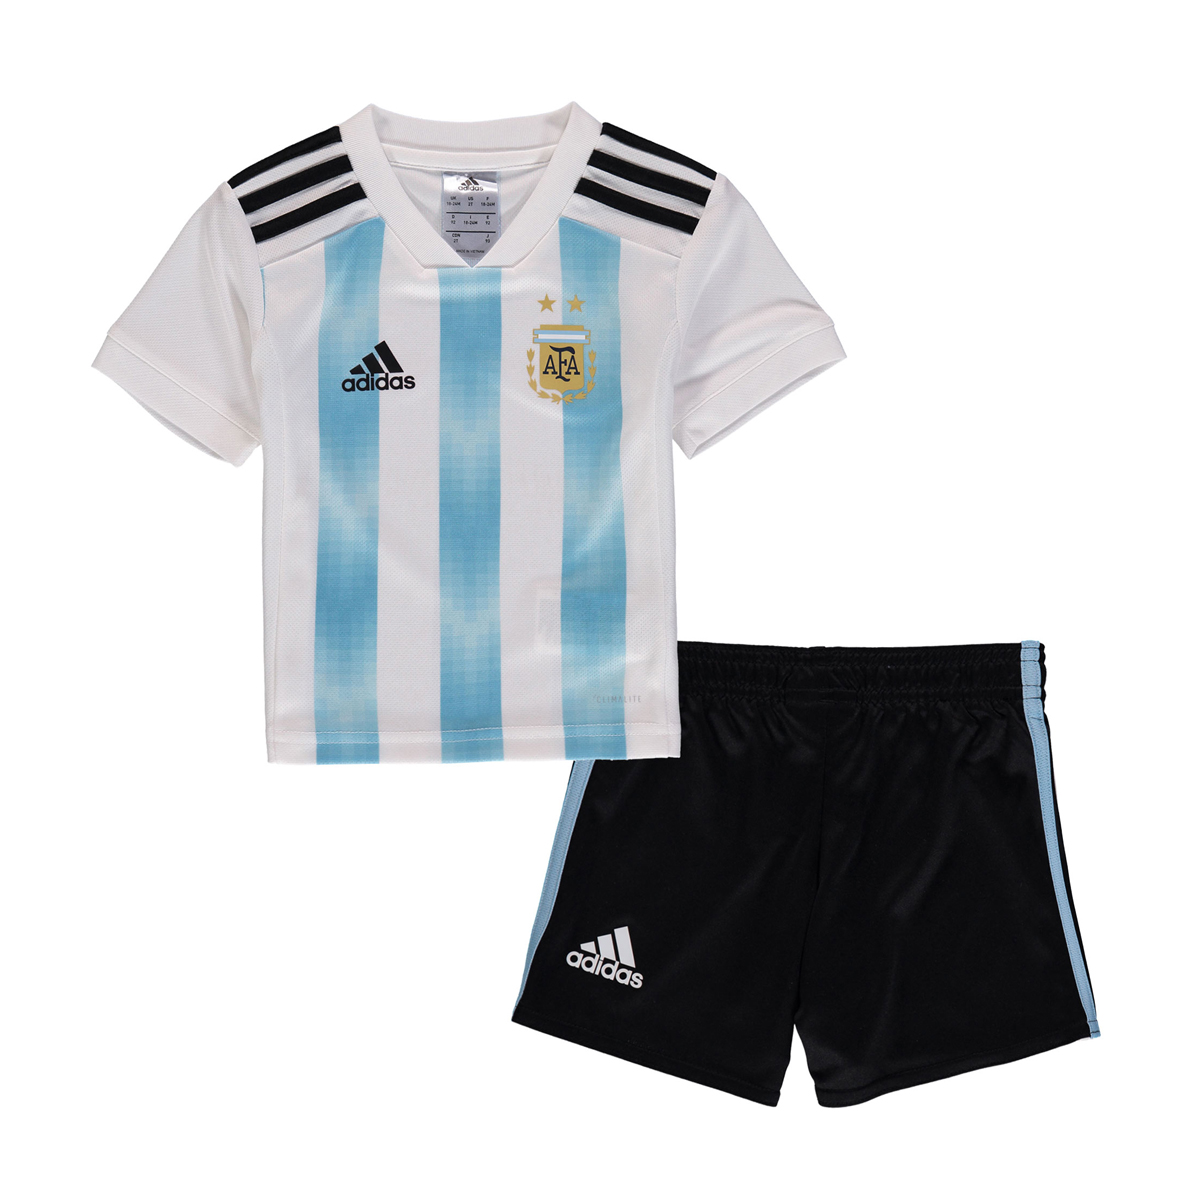 Argentina FIFA World Cup 2018 